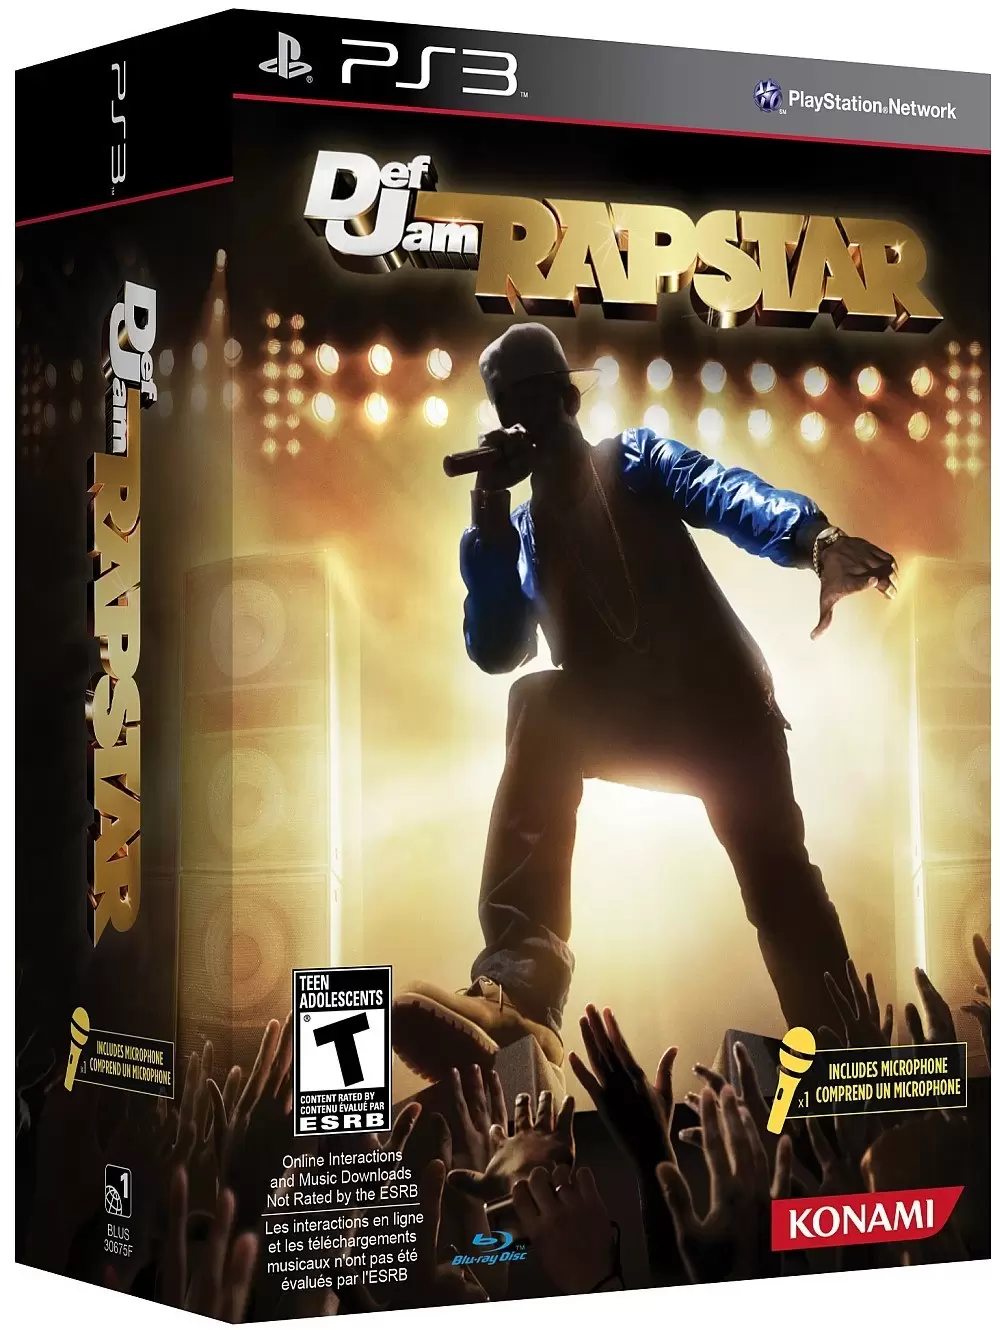 PS3 Games - Def Jam Rapstar With Microphone